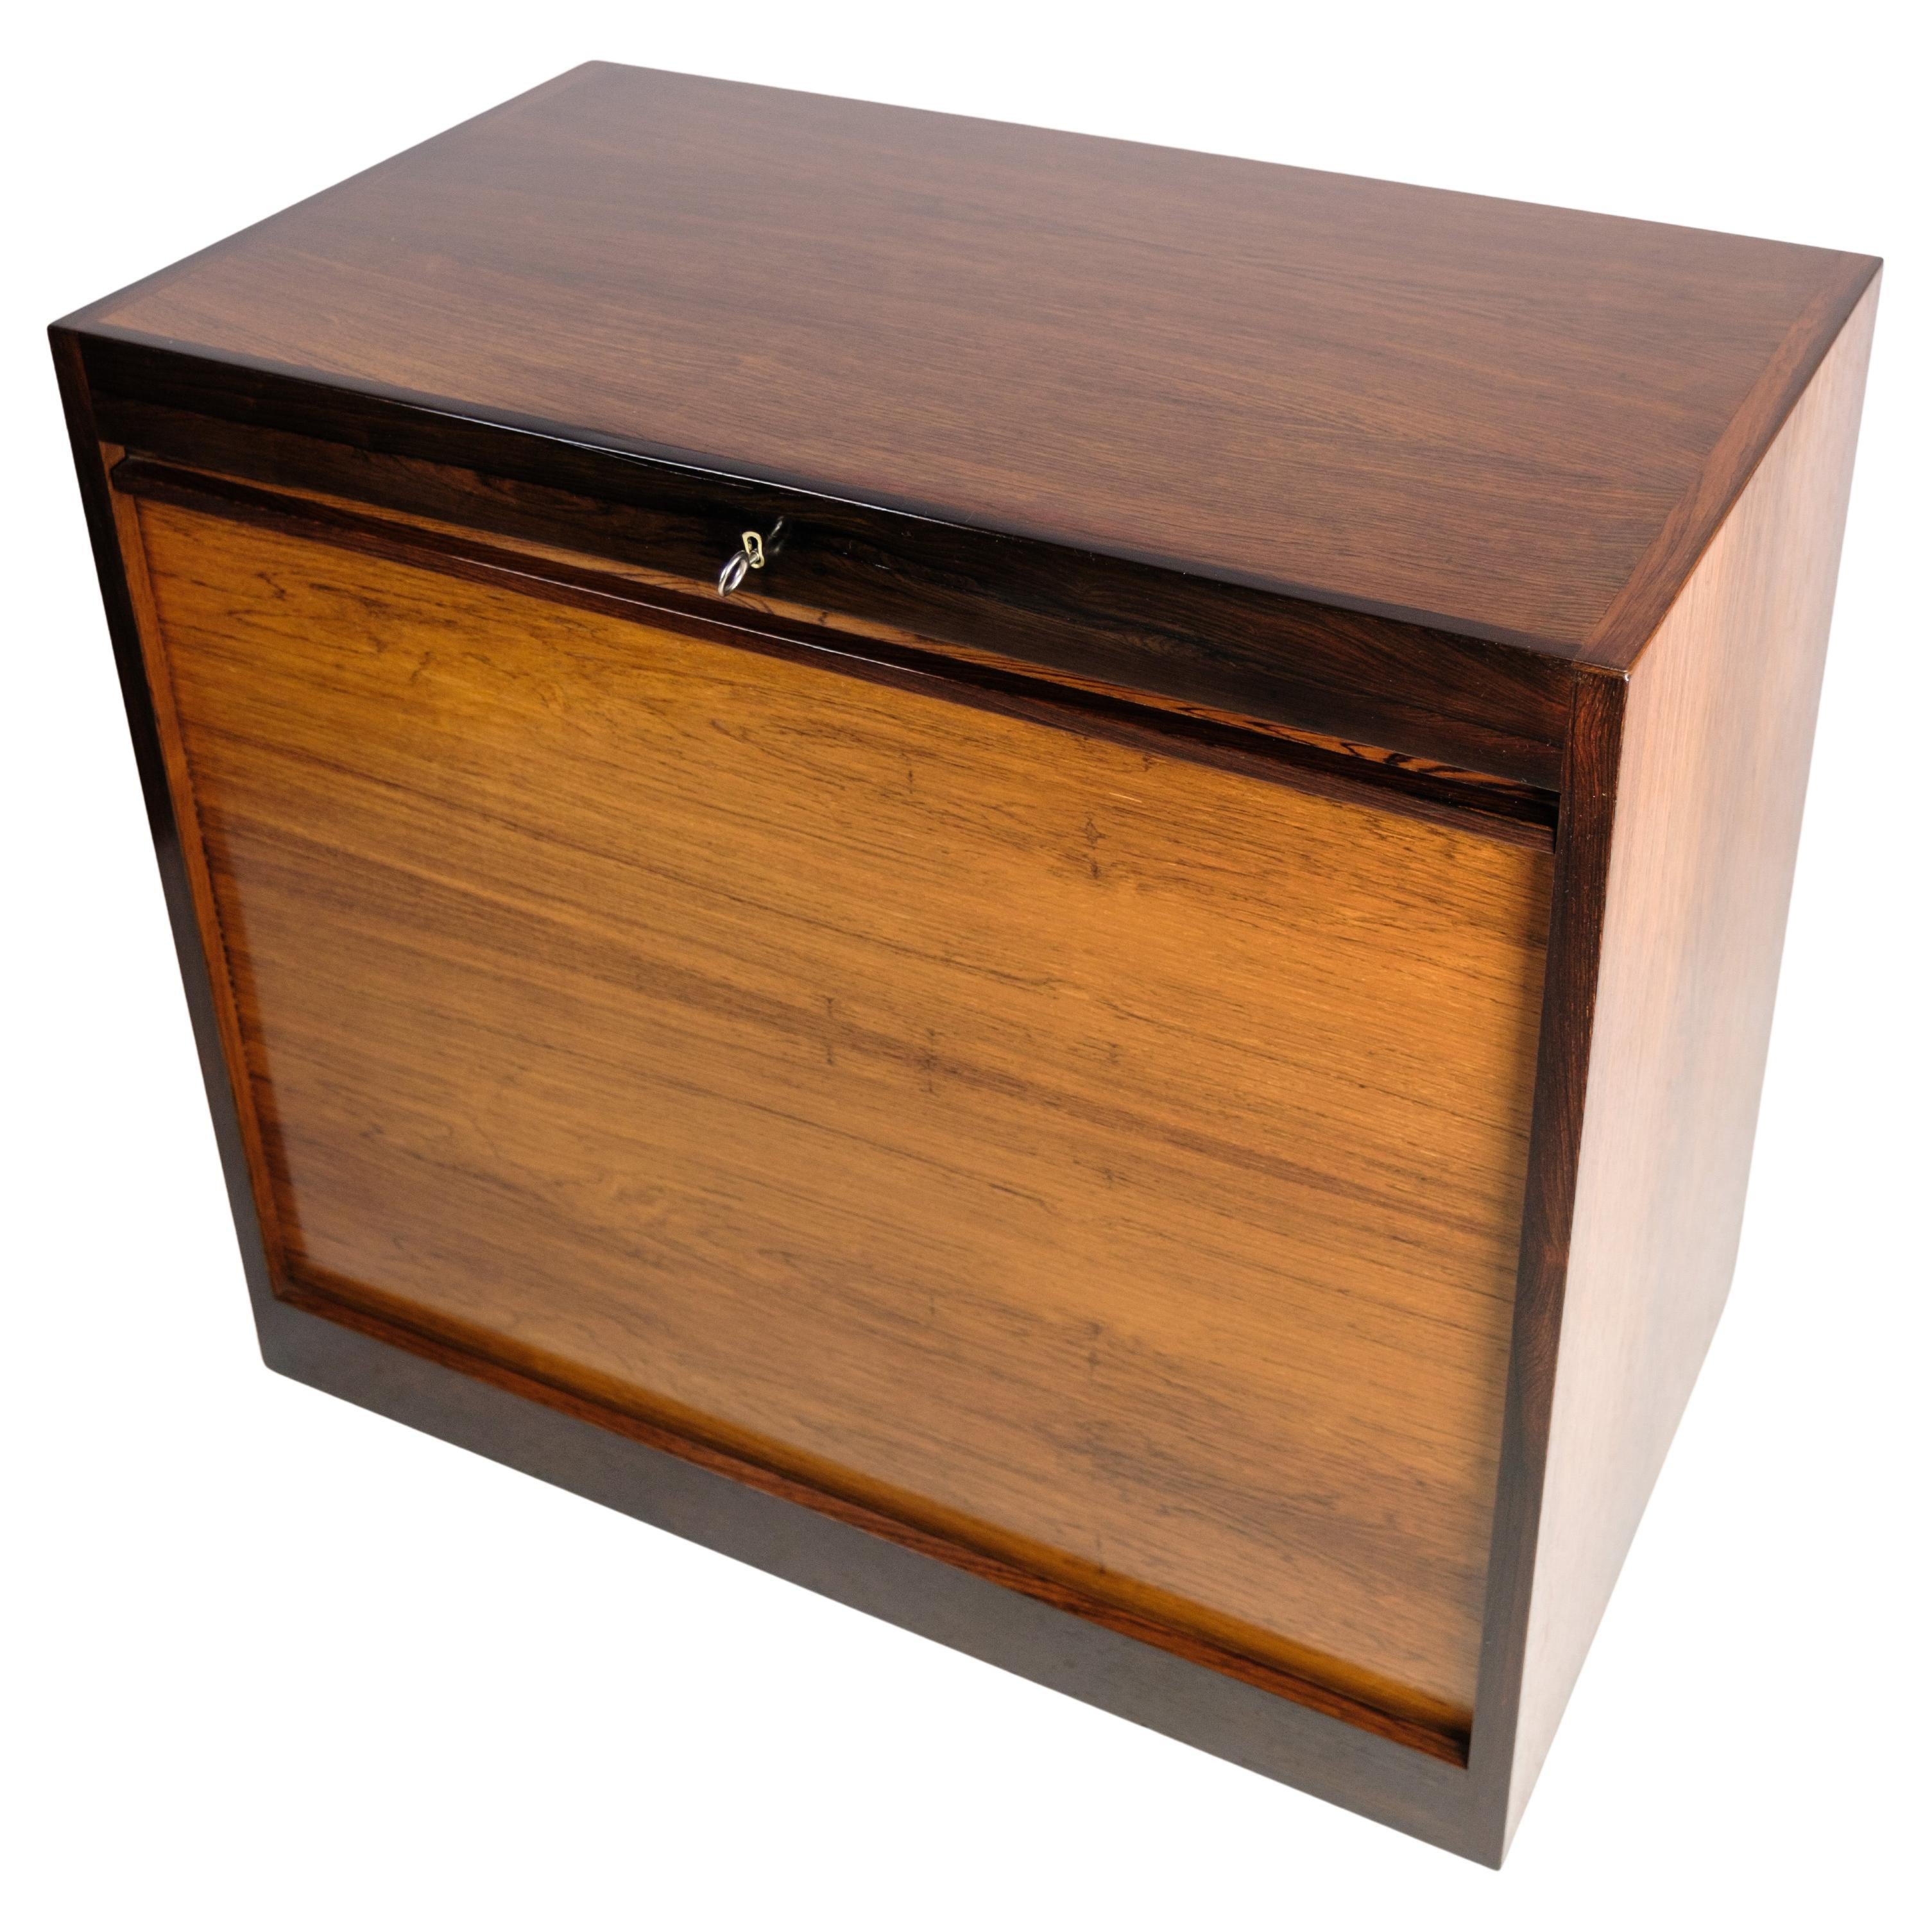 Cabinet with Pull-Up Door in Rosewood of Danish Design from the 1960s